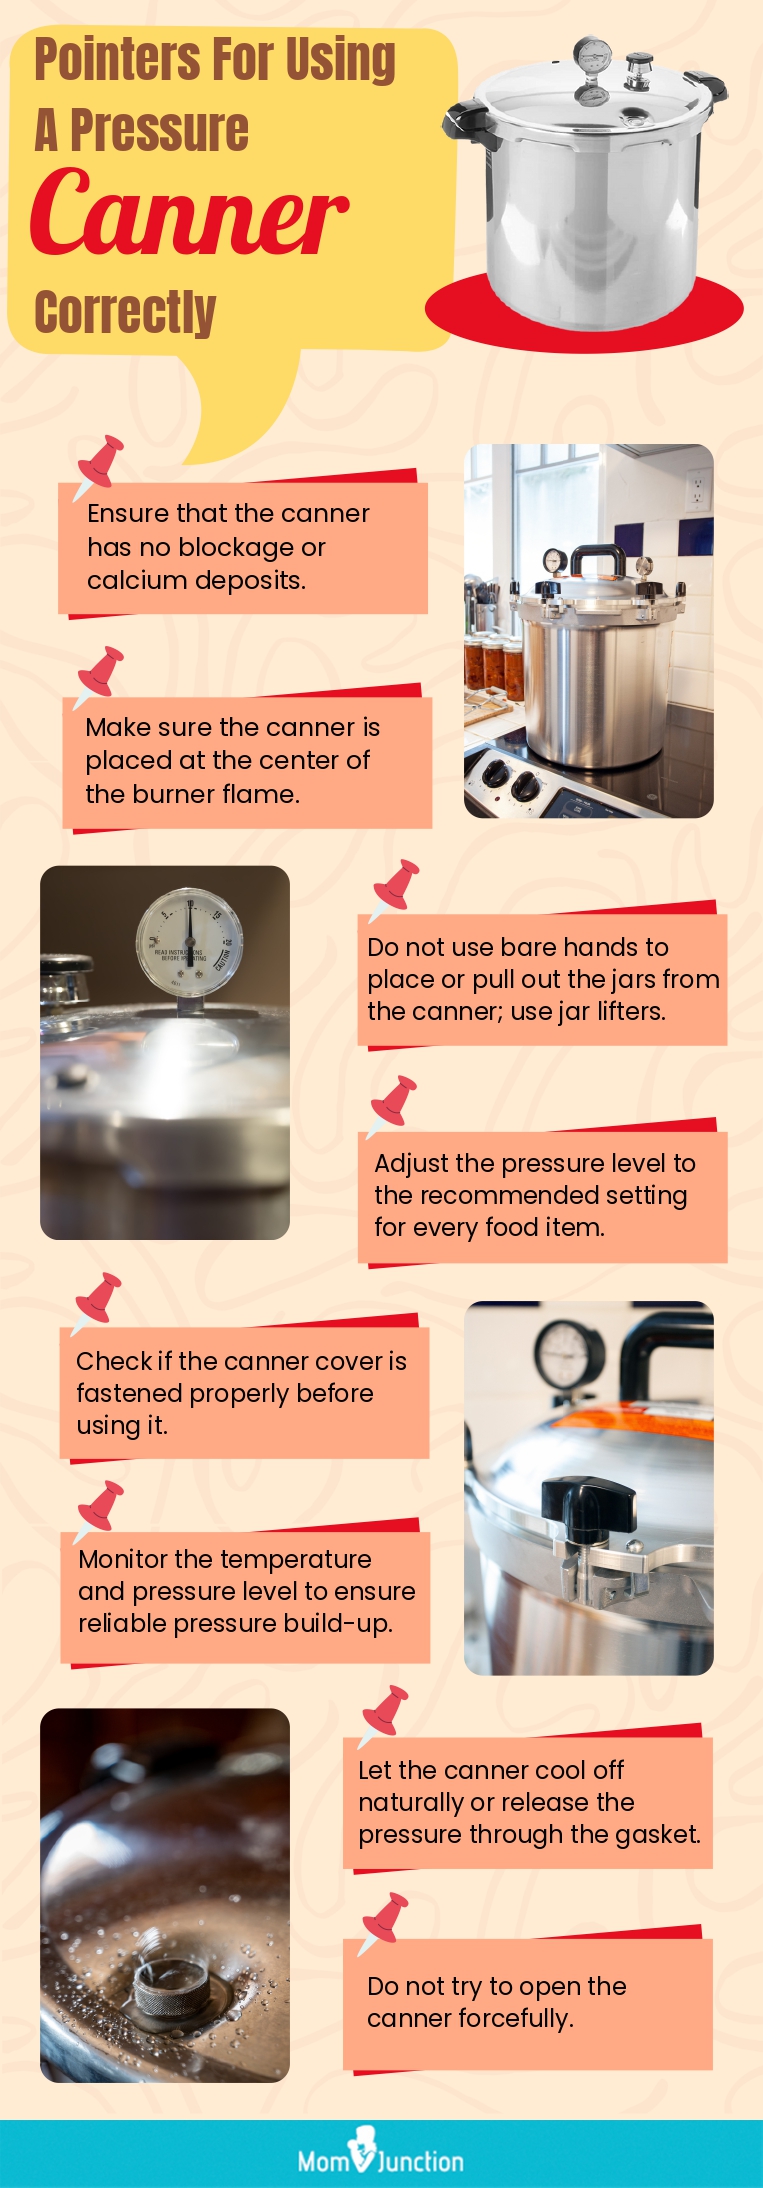 Pointers For Using A Pressure Canner Correctly (infographic)